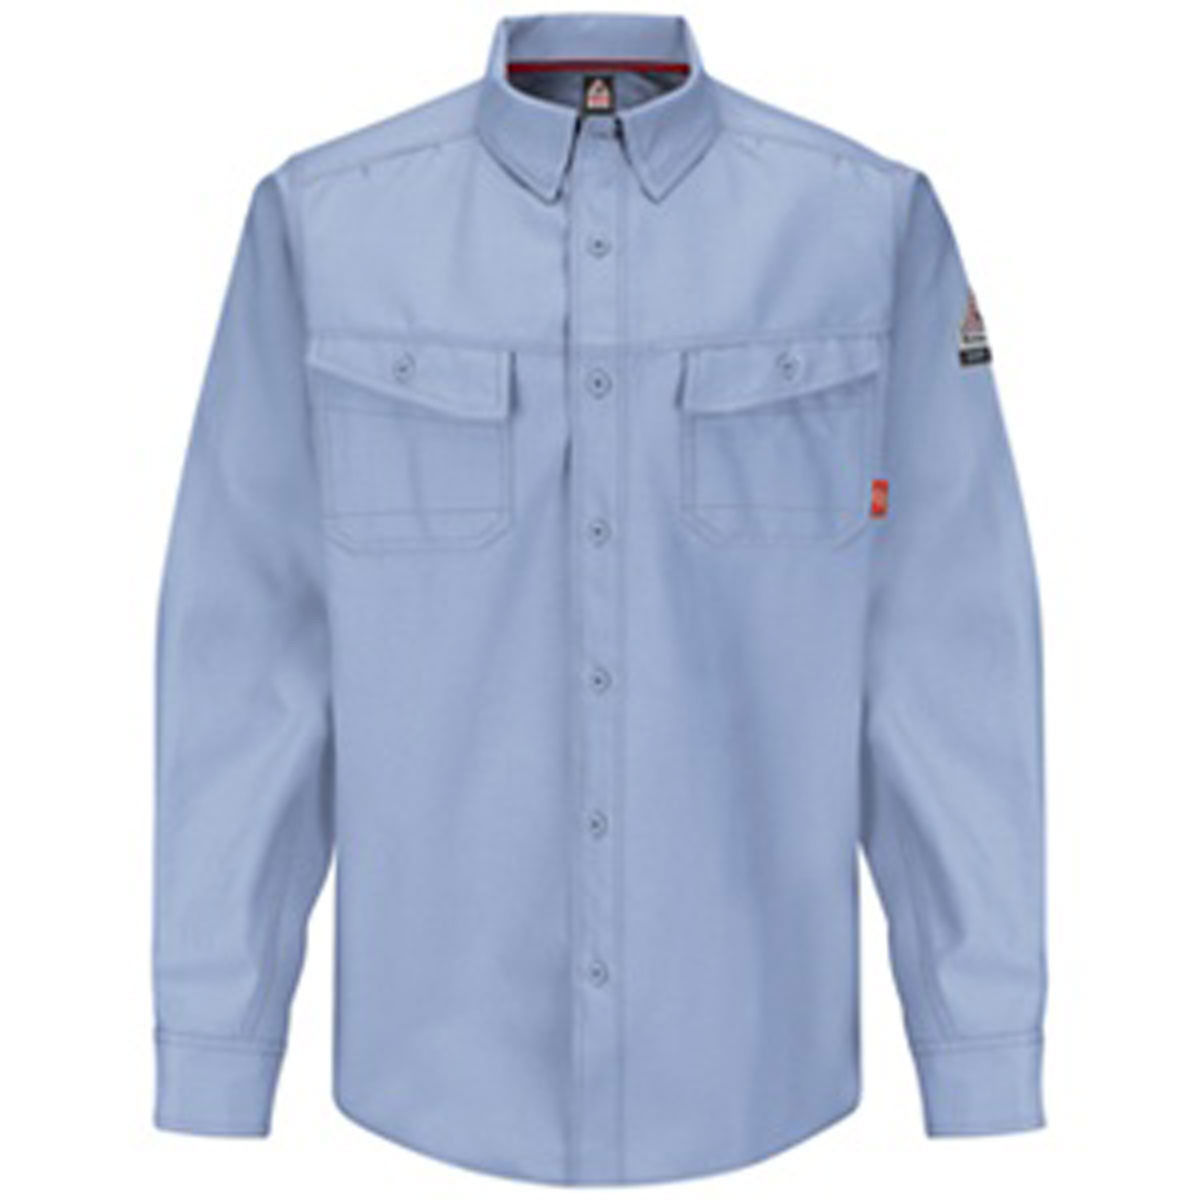 What is the thickness of S10NV Men’s Industrial Work Shirt, Navy Blue?